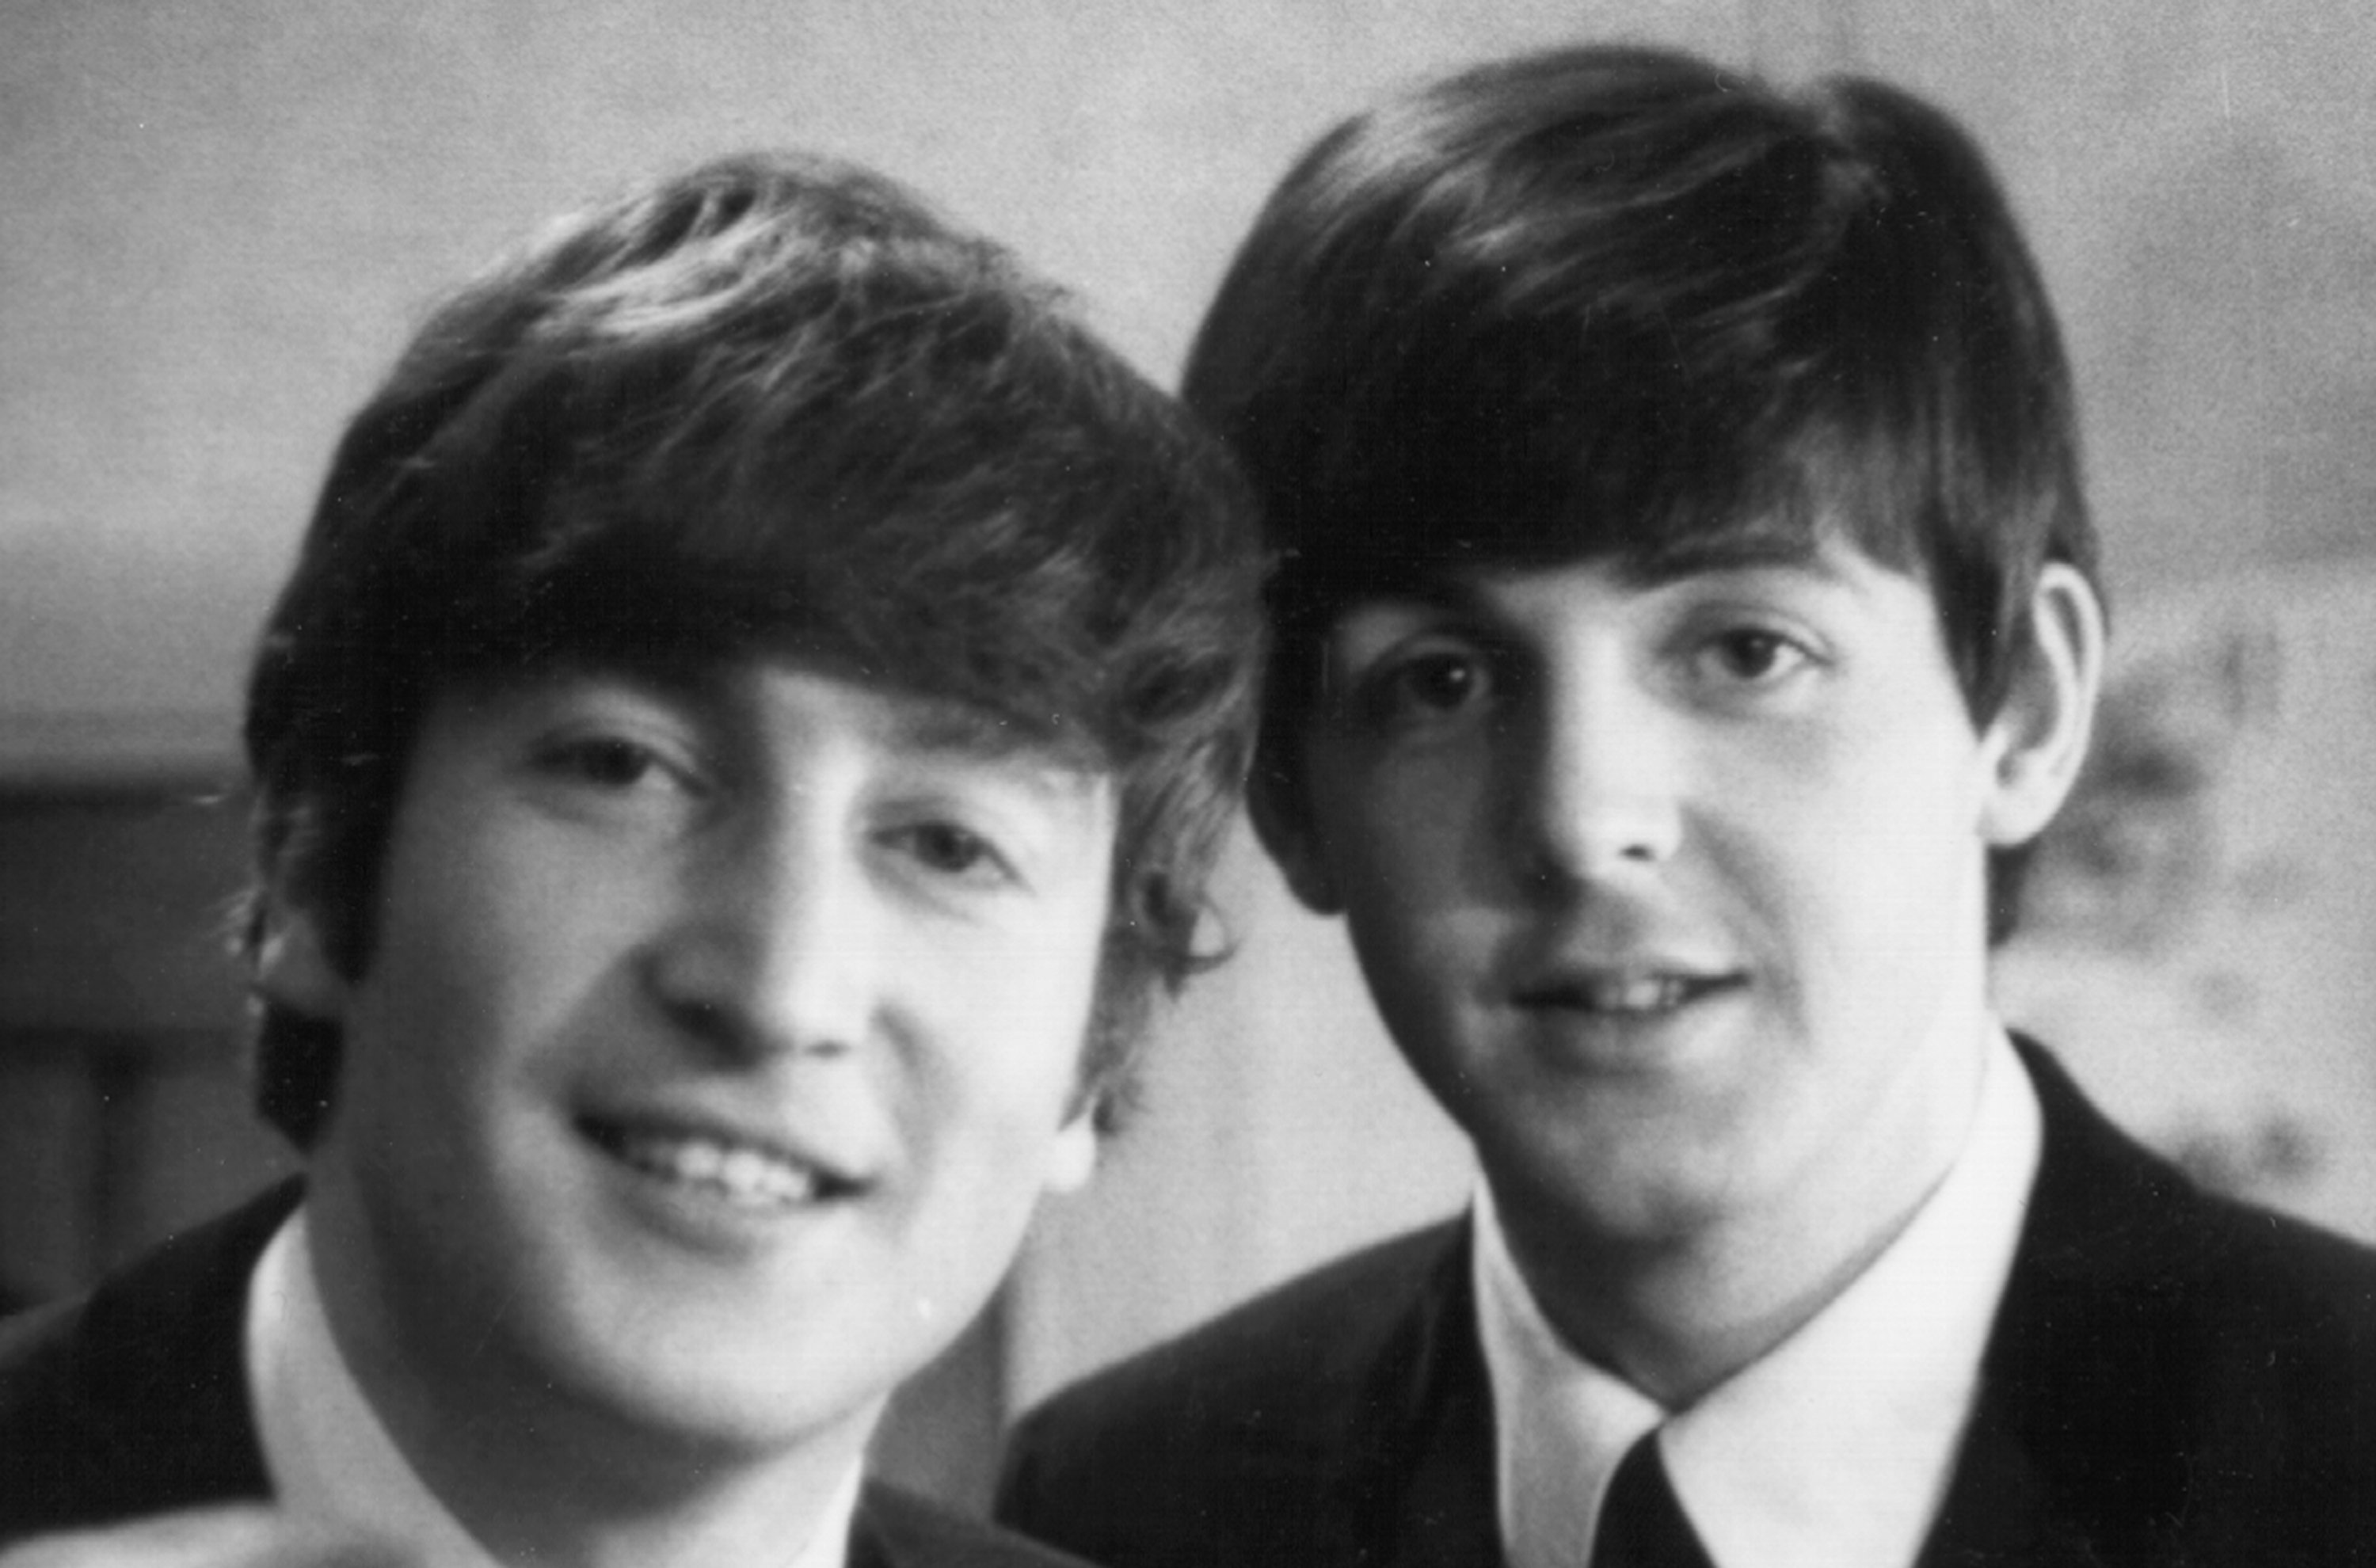 A black and white picture of John Lennon and Paul McCartney wearing suits and posing close together.